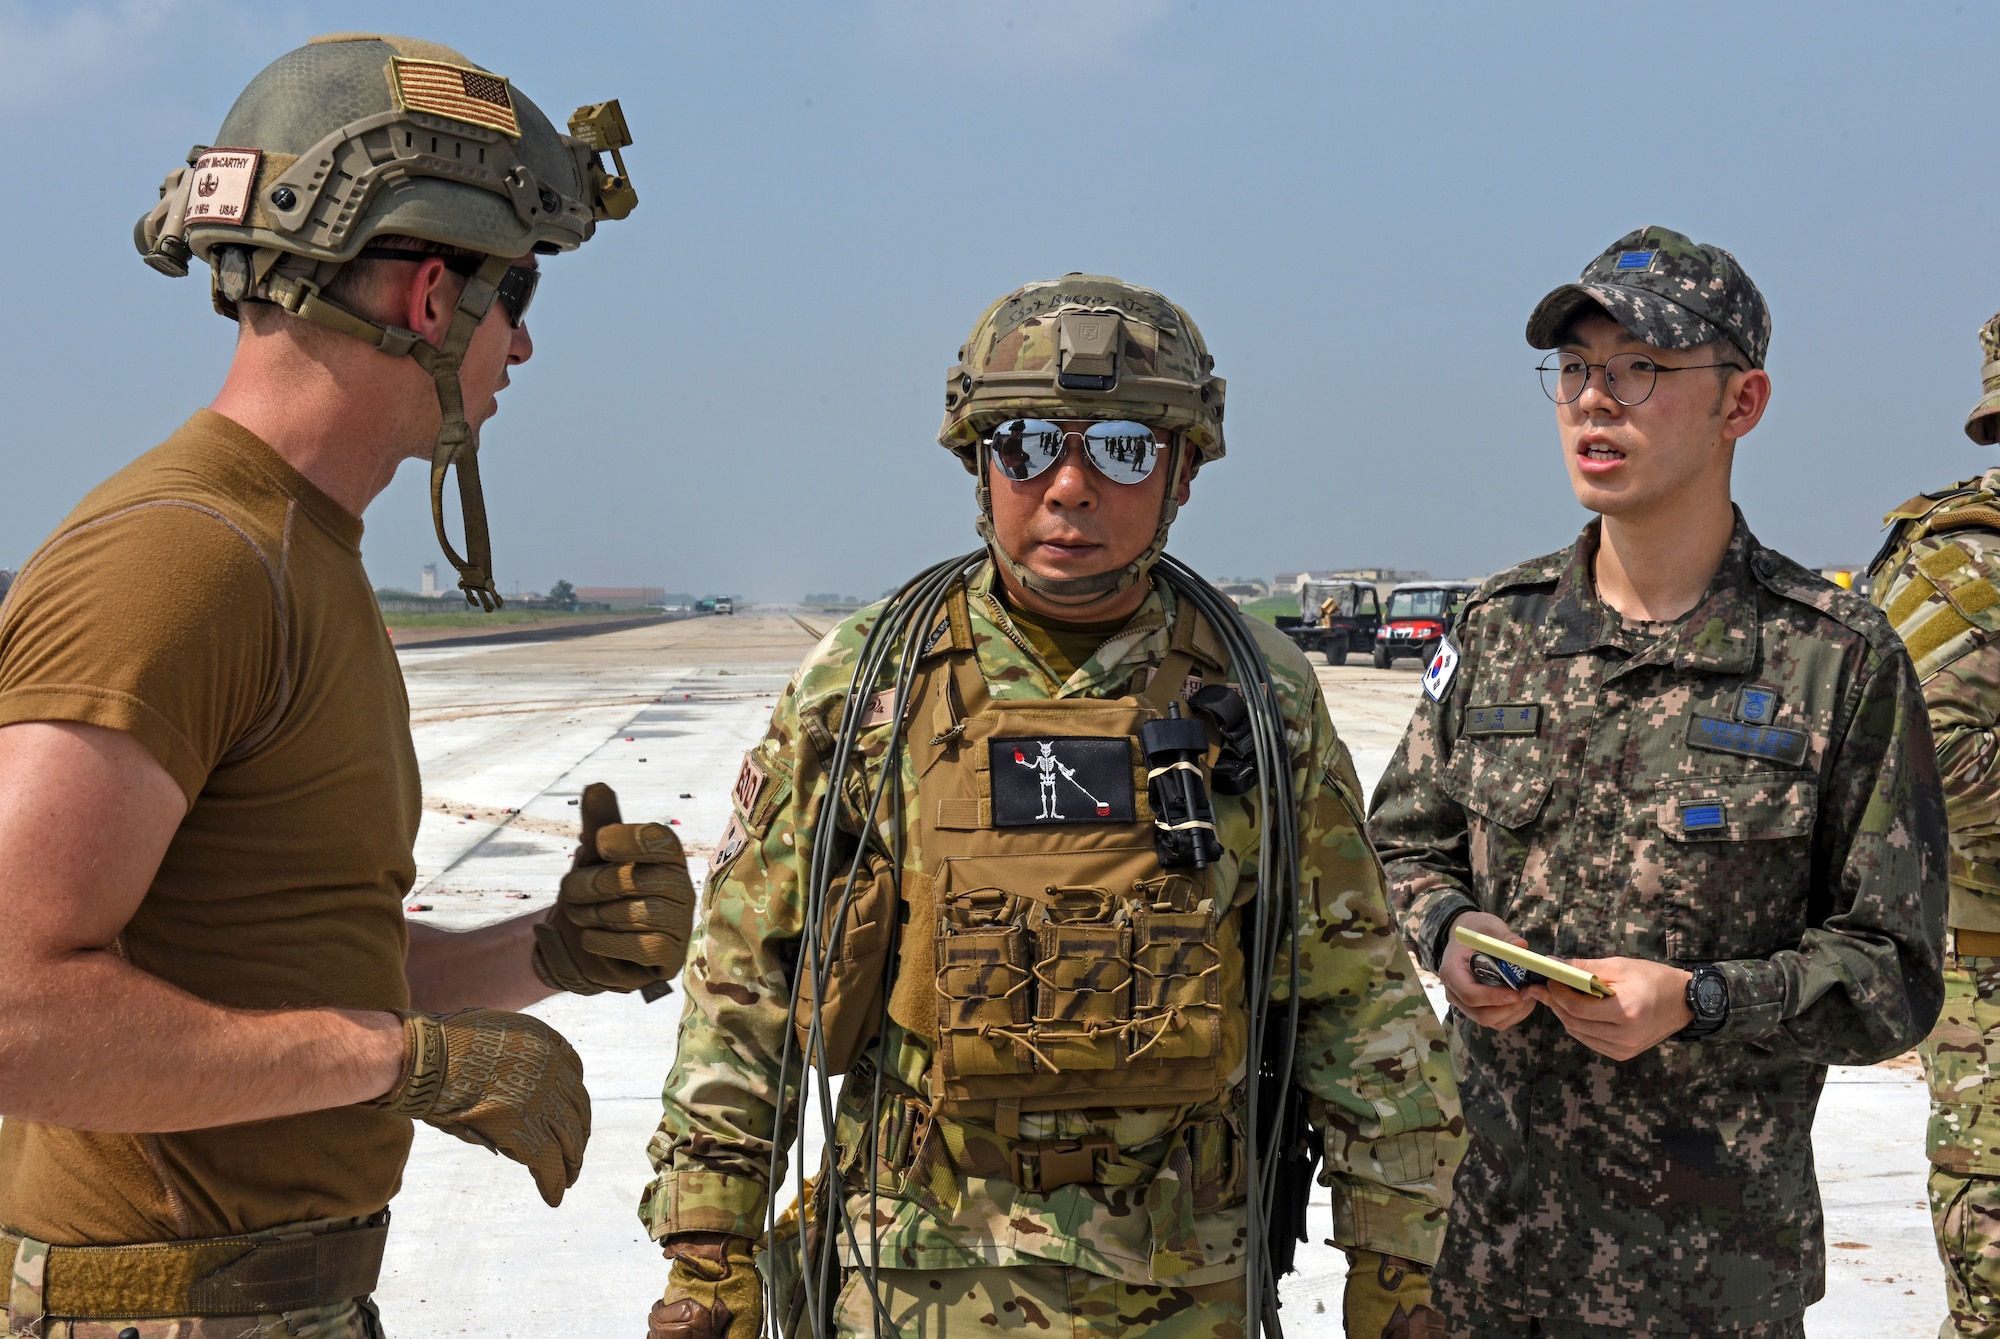 Airmen from the 8th Civil Engineer Squadron Explosive Ordnance Disposal unit conduct joint training with 38th Fighter Group EOD unit at Kunsan Air Base, Republic of Korea, Aug. 22, 2019. The joint training focused on procedures and techniques of disposing of unexploded ordnance in various environments. (U.S. Air Force photo by Staff Sgt. Mackenzie Mendez)